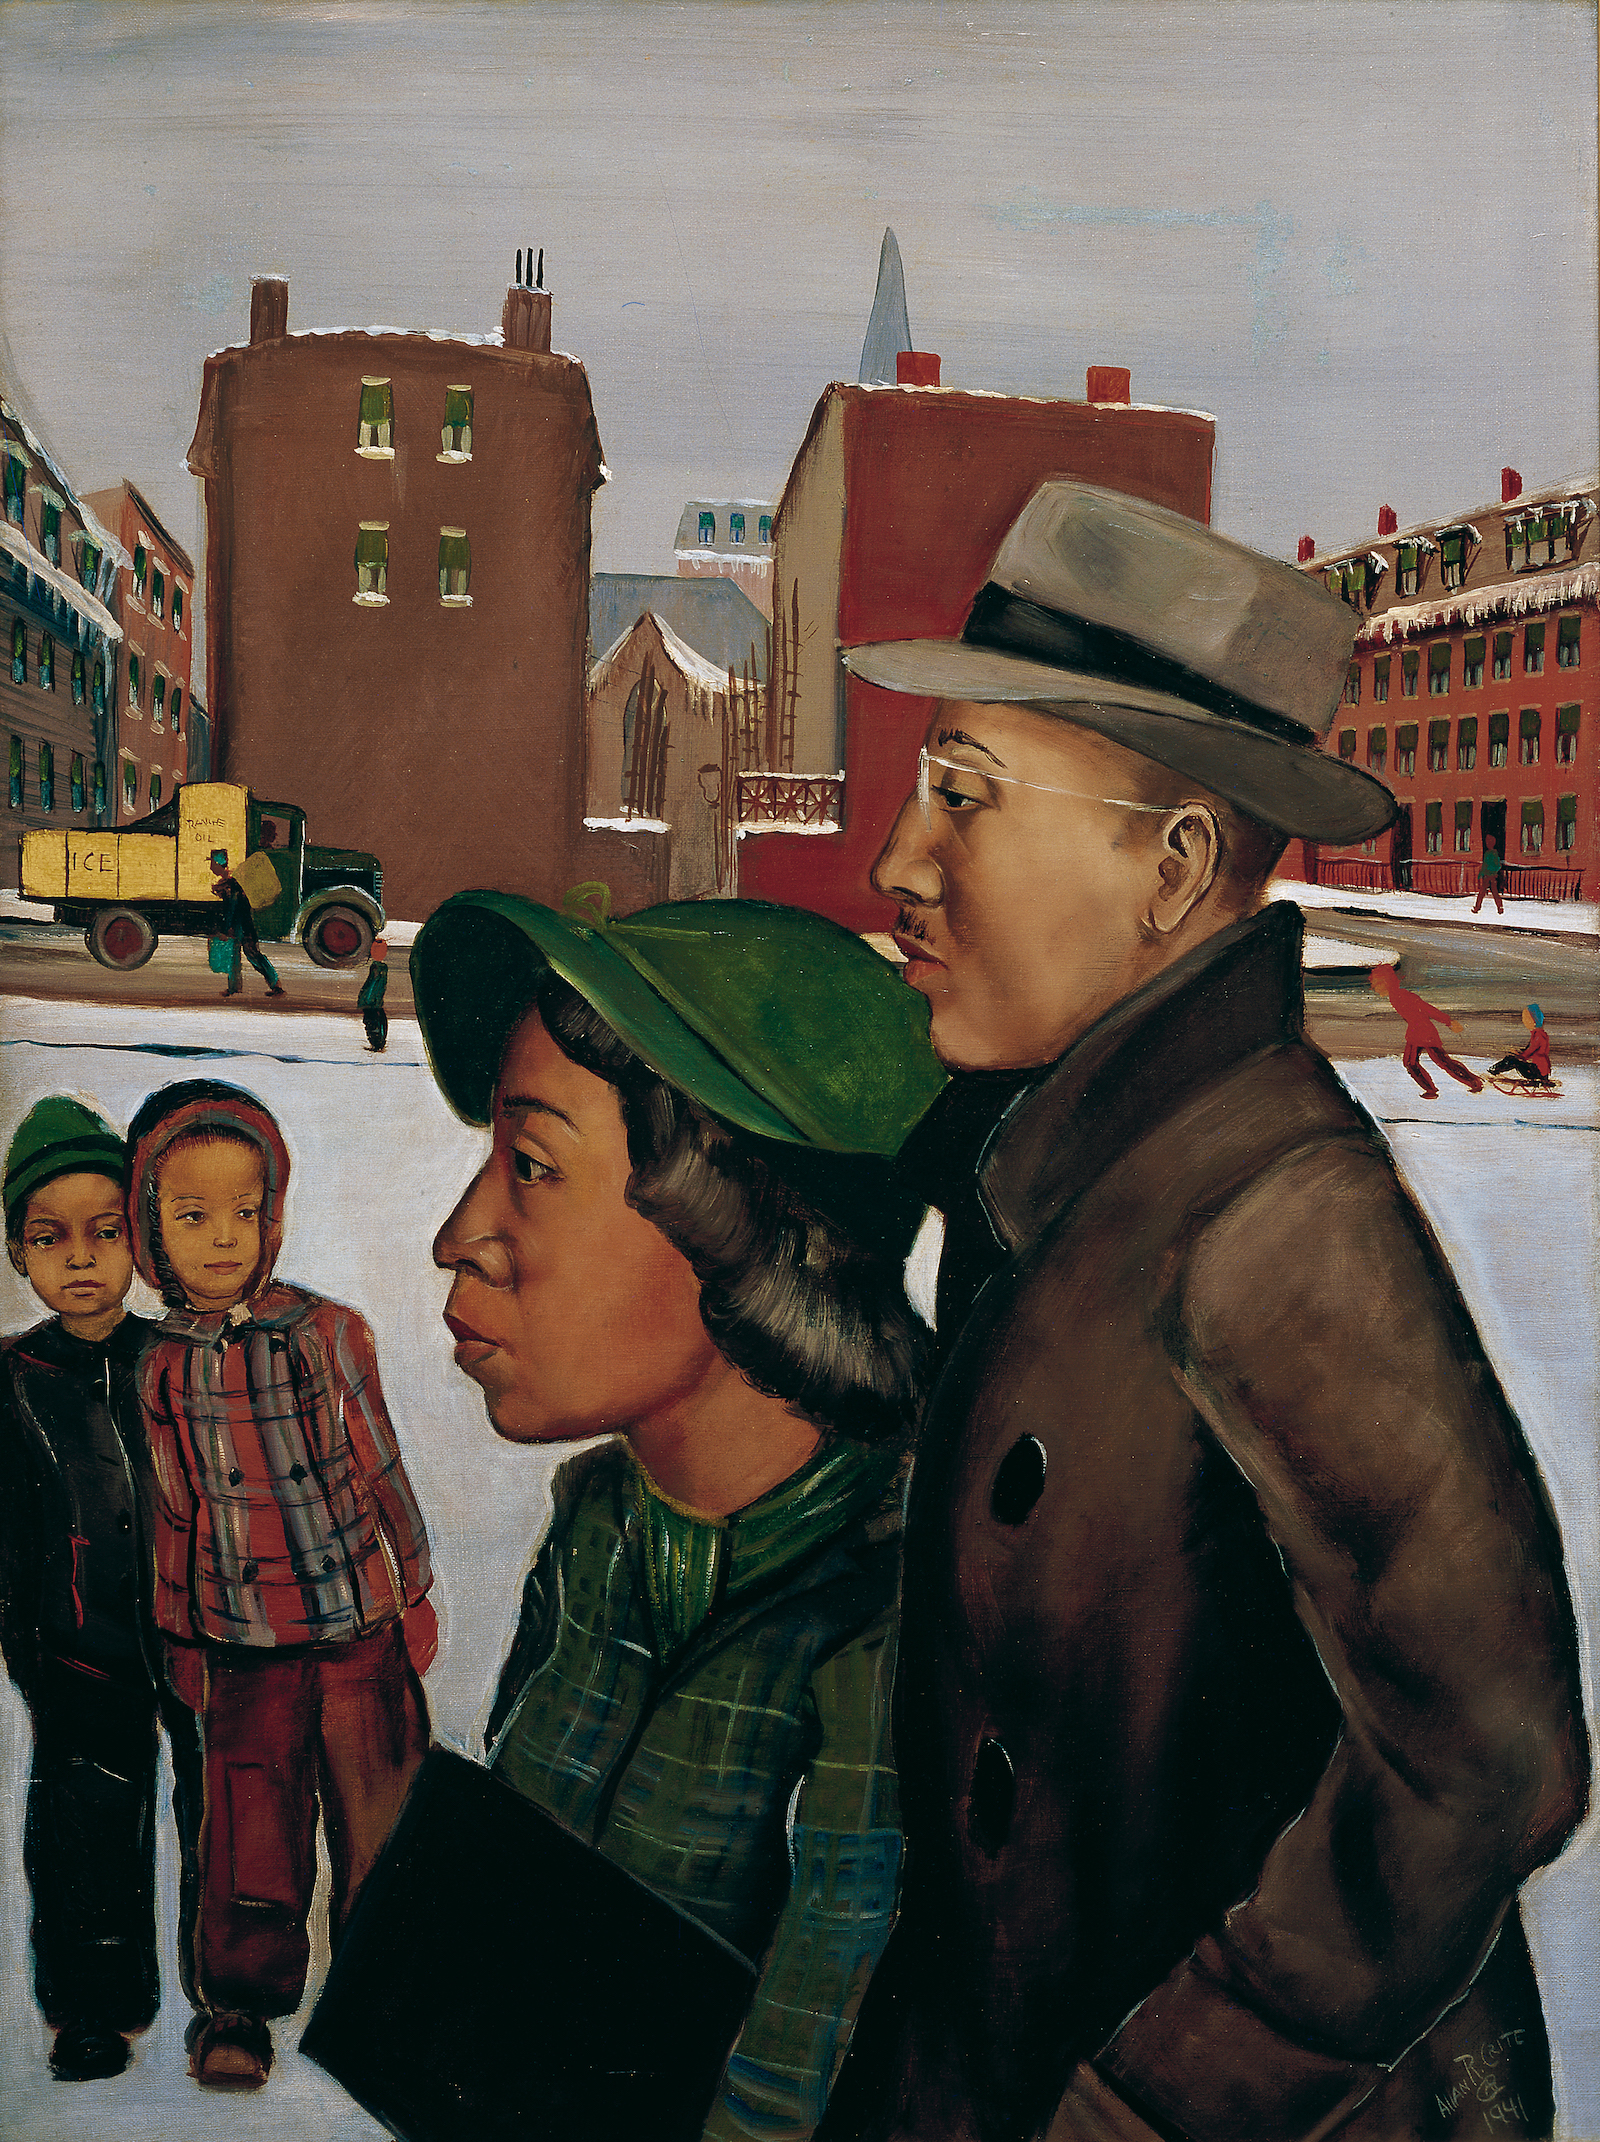 Allan Rohan Crite (1910–2007) Leon and Harriet, 1941 Oil on canvas, 36 x 26 in. Boston Athenæum, gift of the artist, 1971